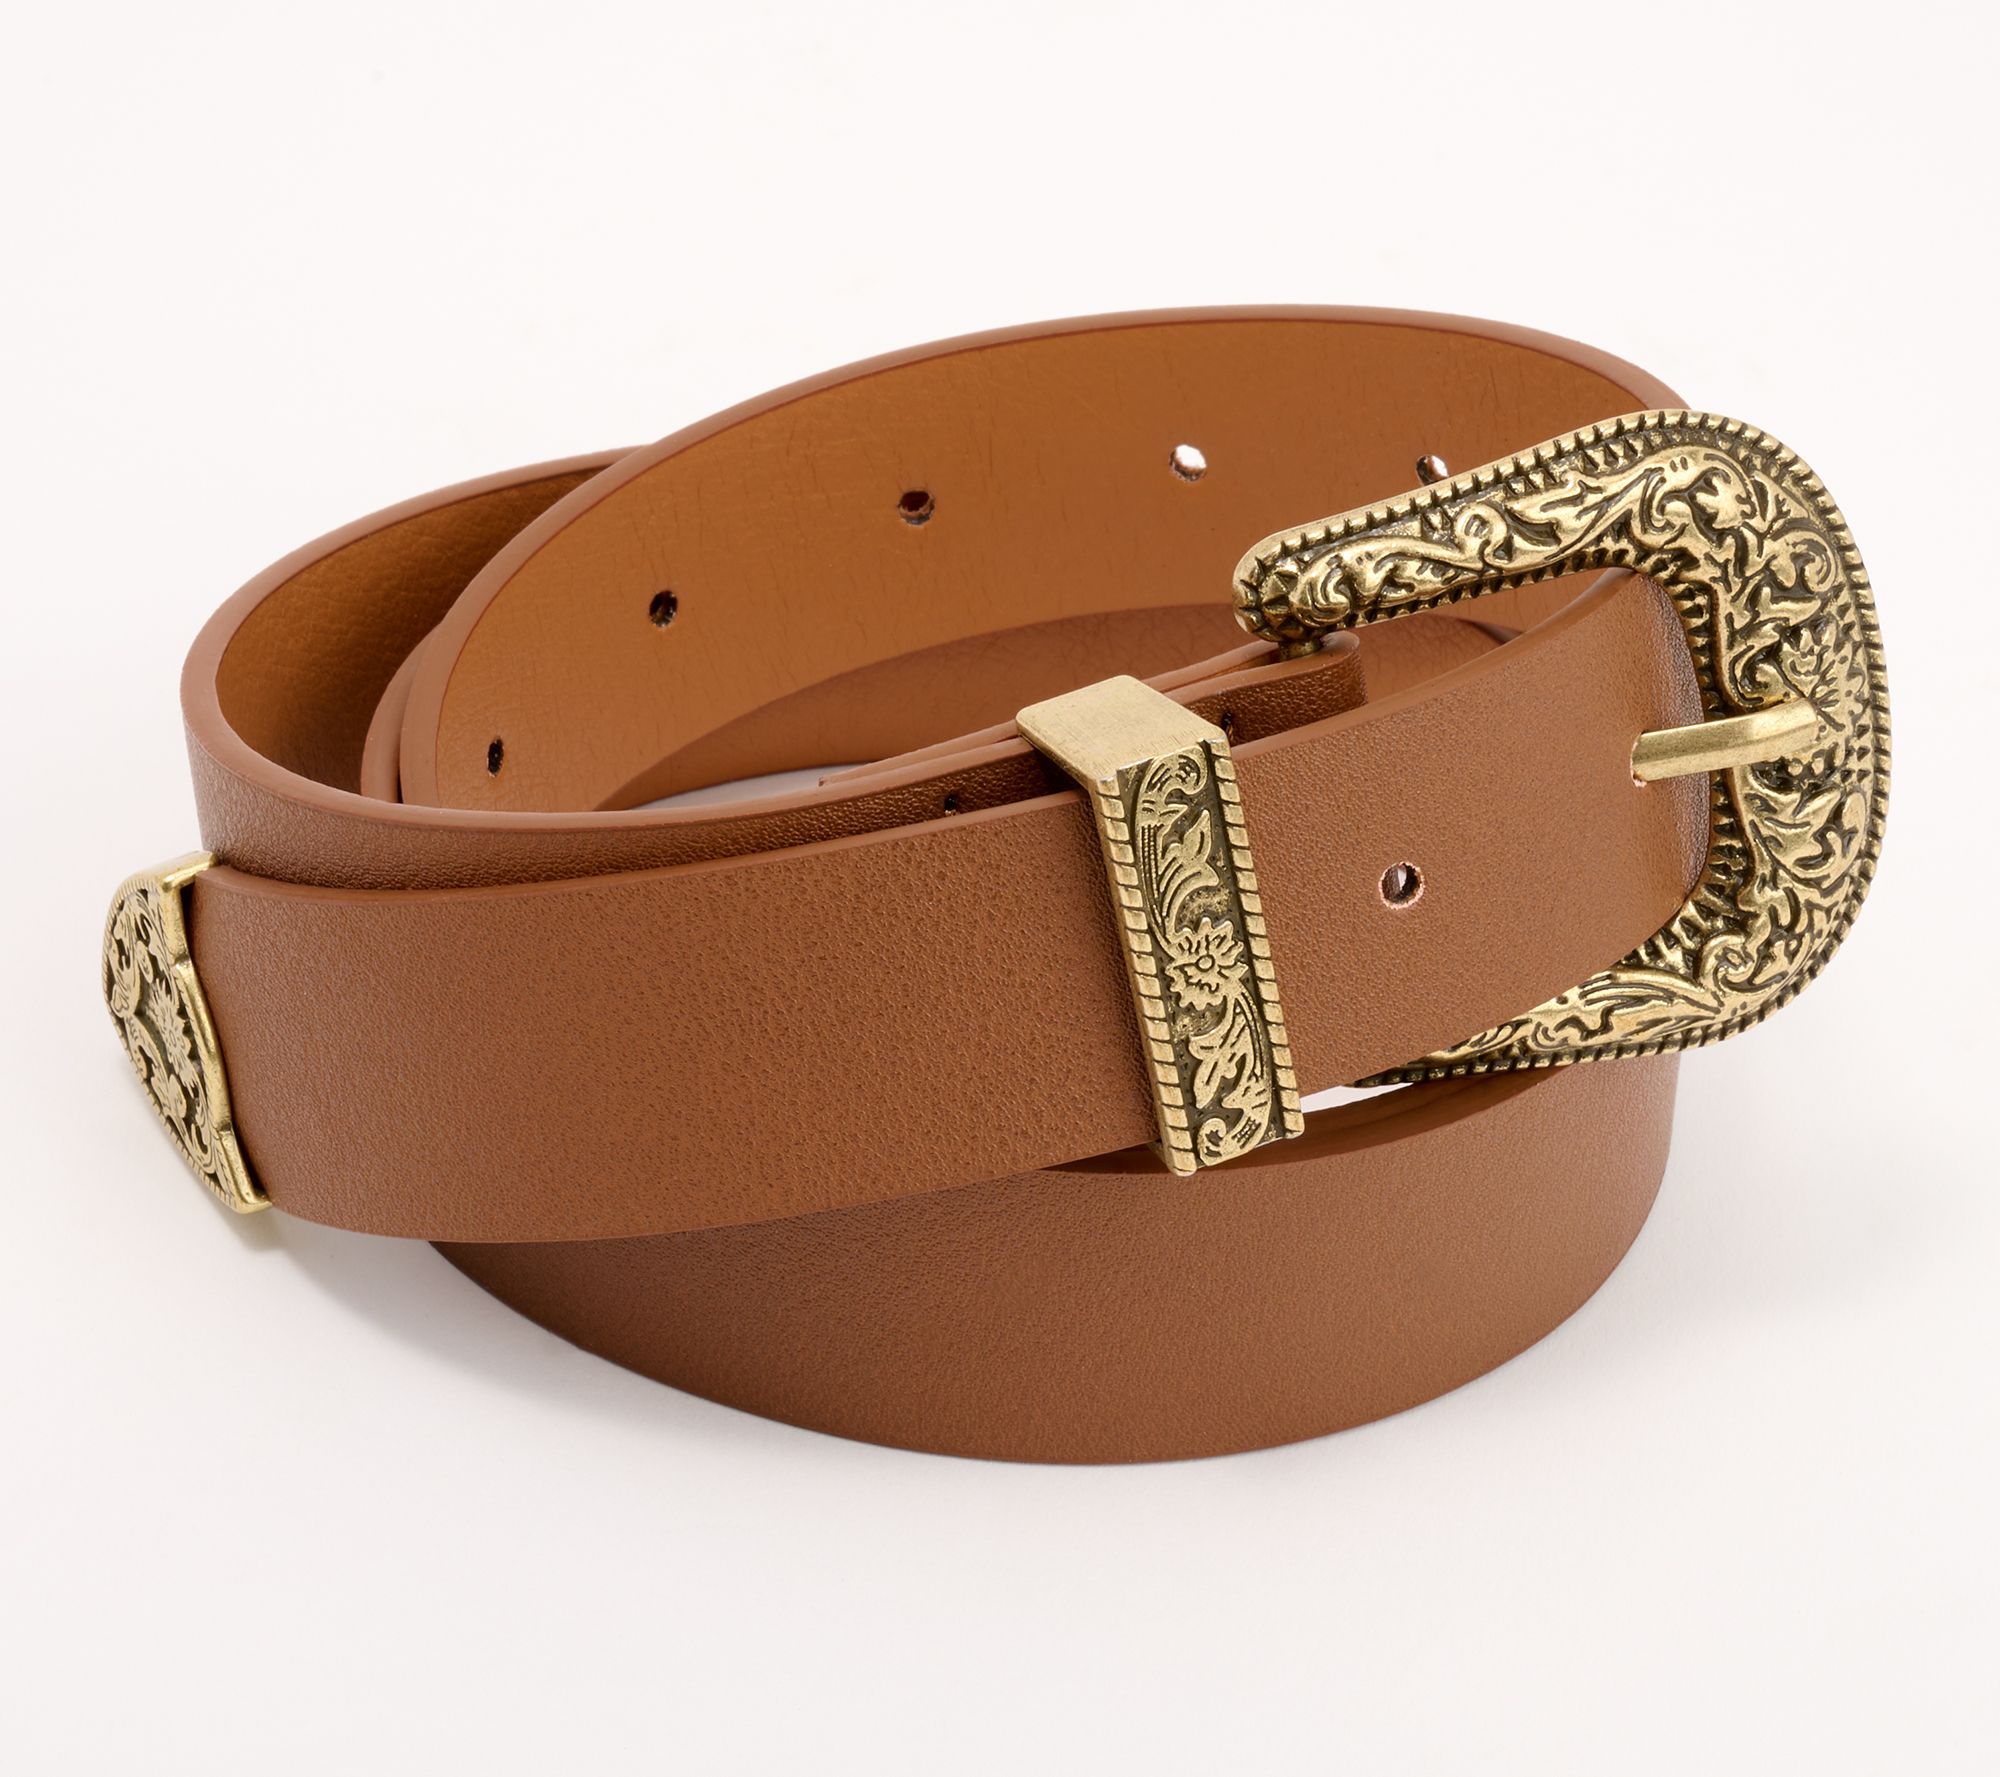 Leave An Impression PU Leather Children Belt (Unisex) Recommended for Ages 24 Months -10 Years Option 2 Is for The Checkered Print Brown